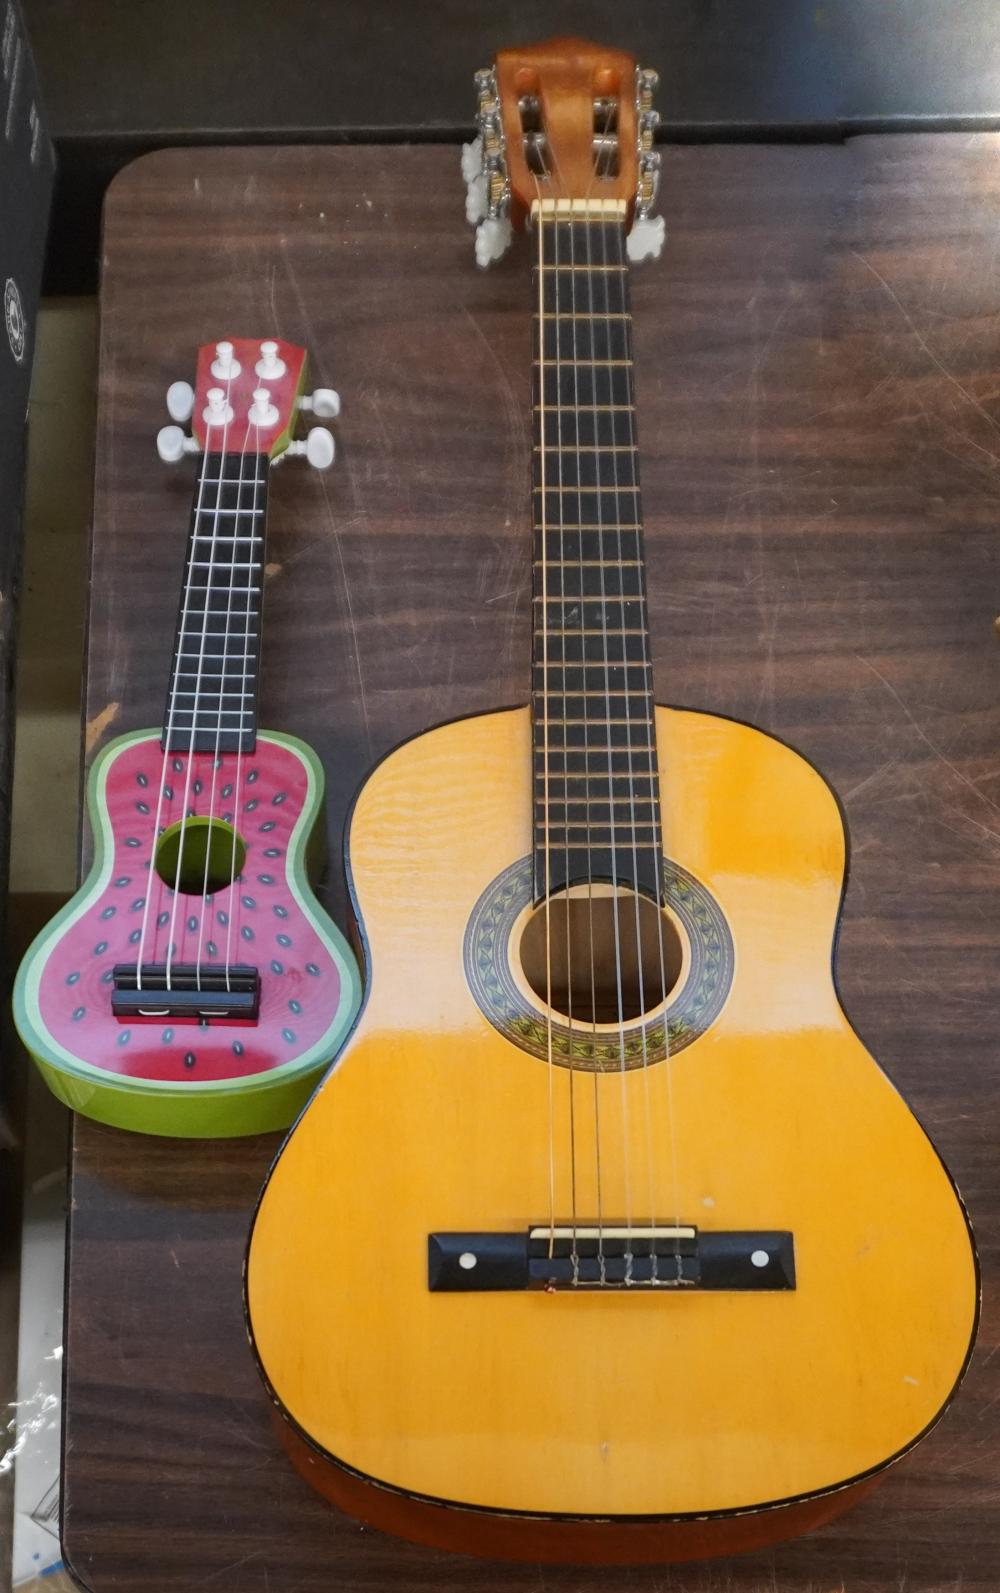 ACOUSTIC GUITAR AND WATERMELON 2e52bd